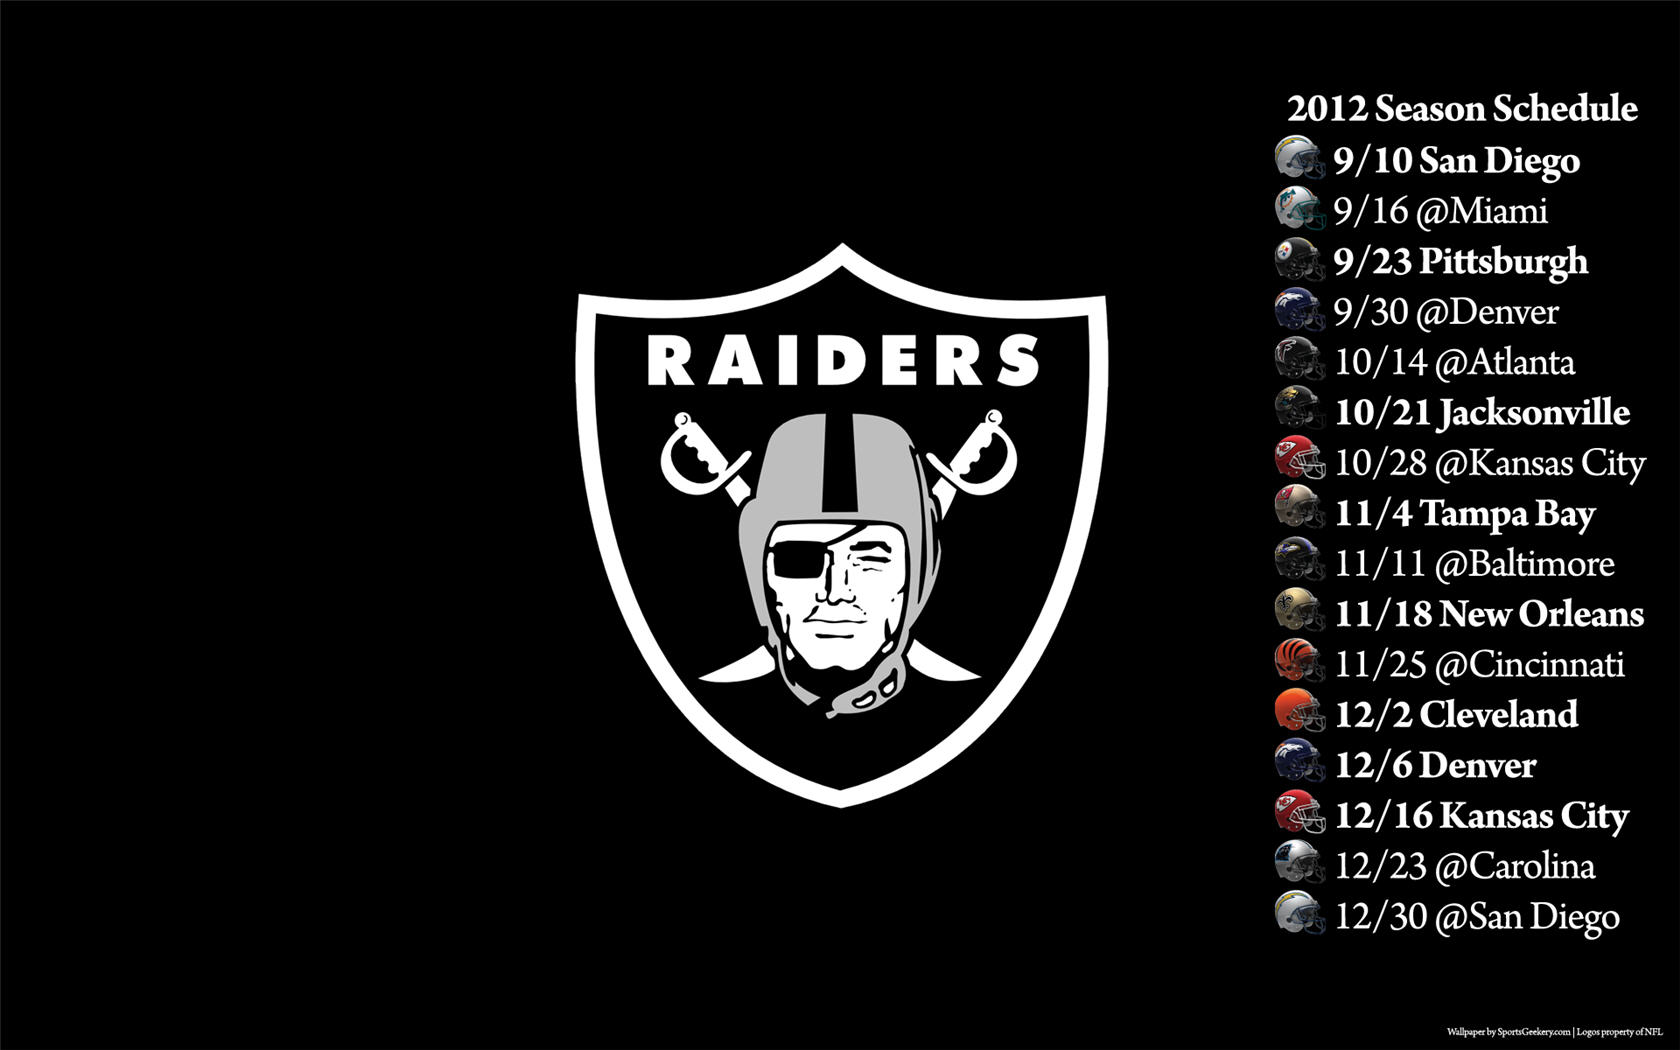 Hope you like this Oakland Raiders wallpaper HD background as much as